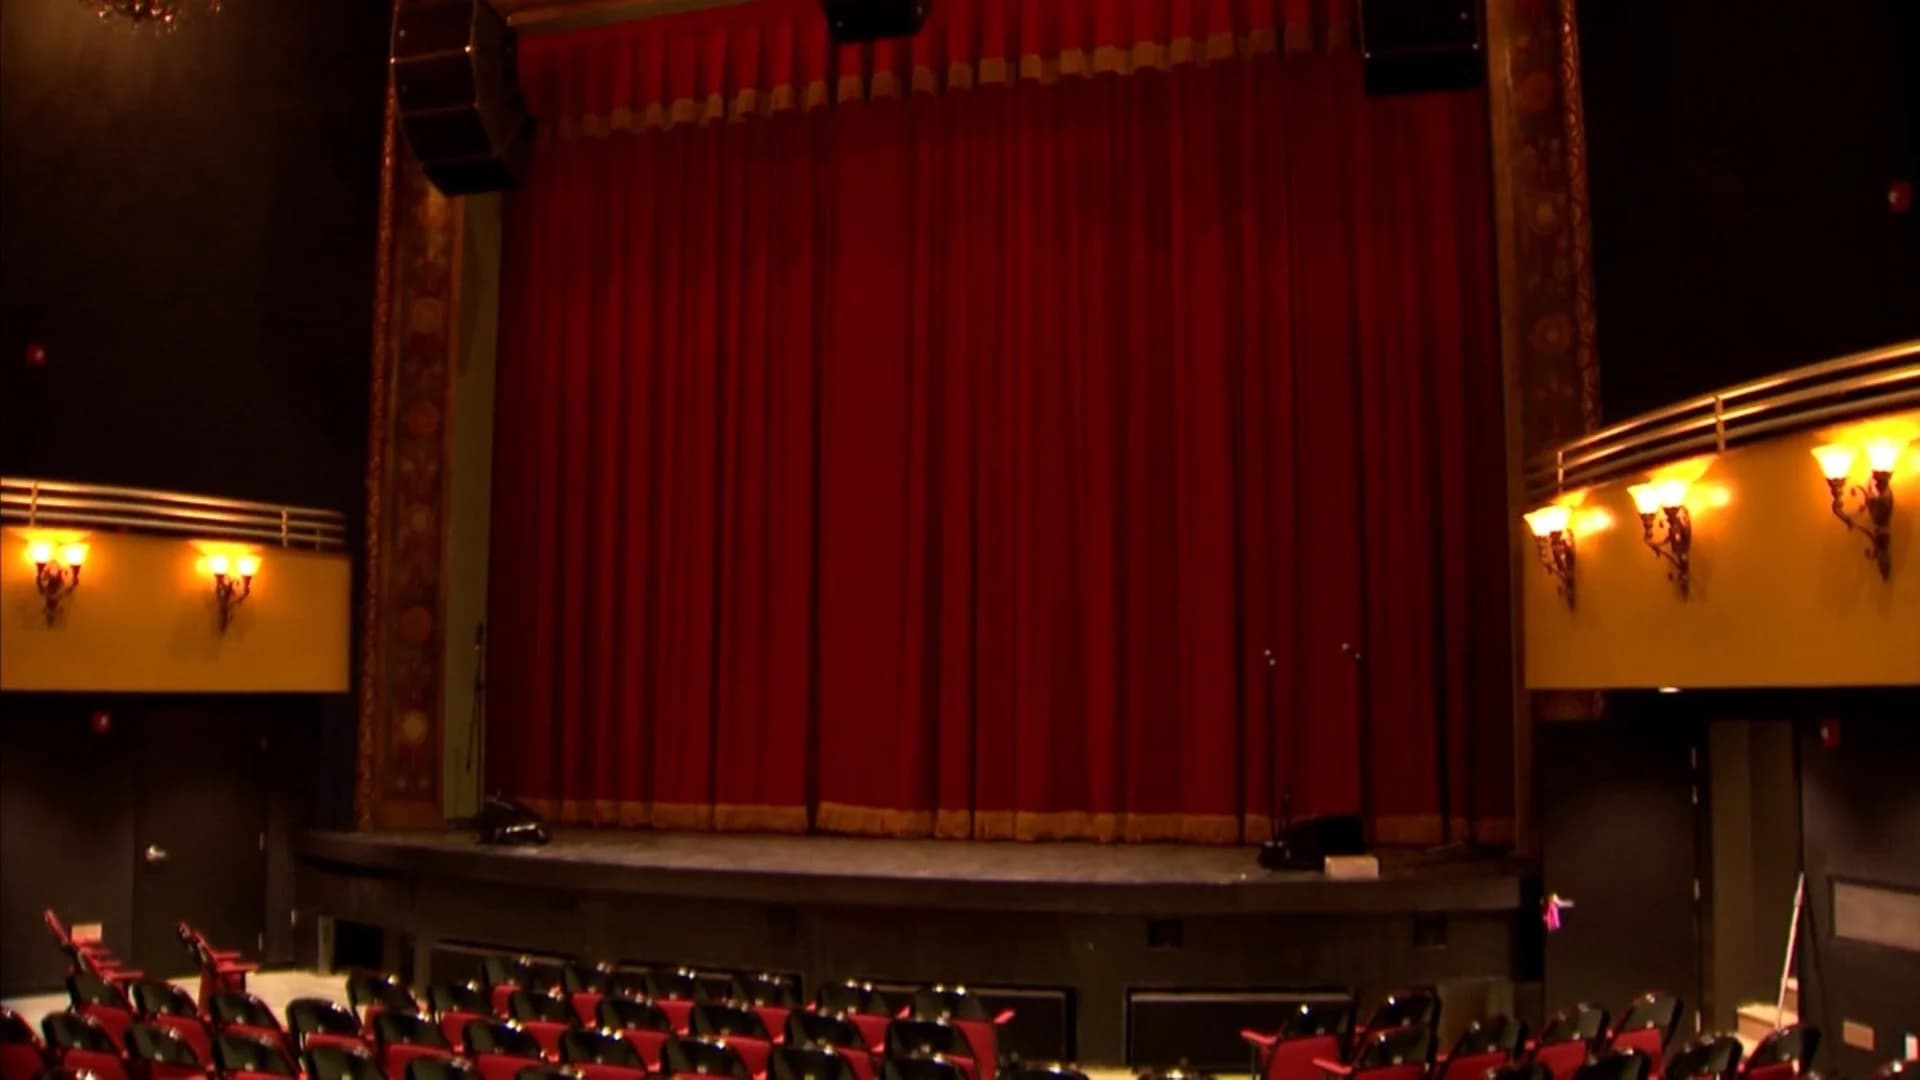 Wall Street Theater, formerly known as the Globe Theater, reopens in Norwalk